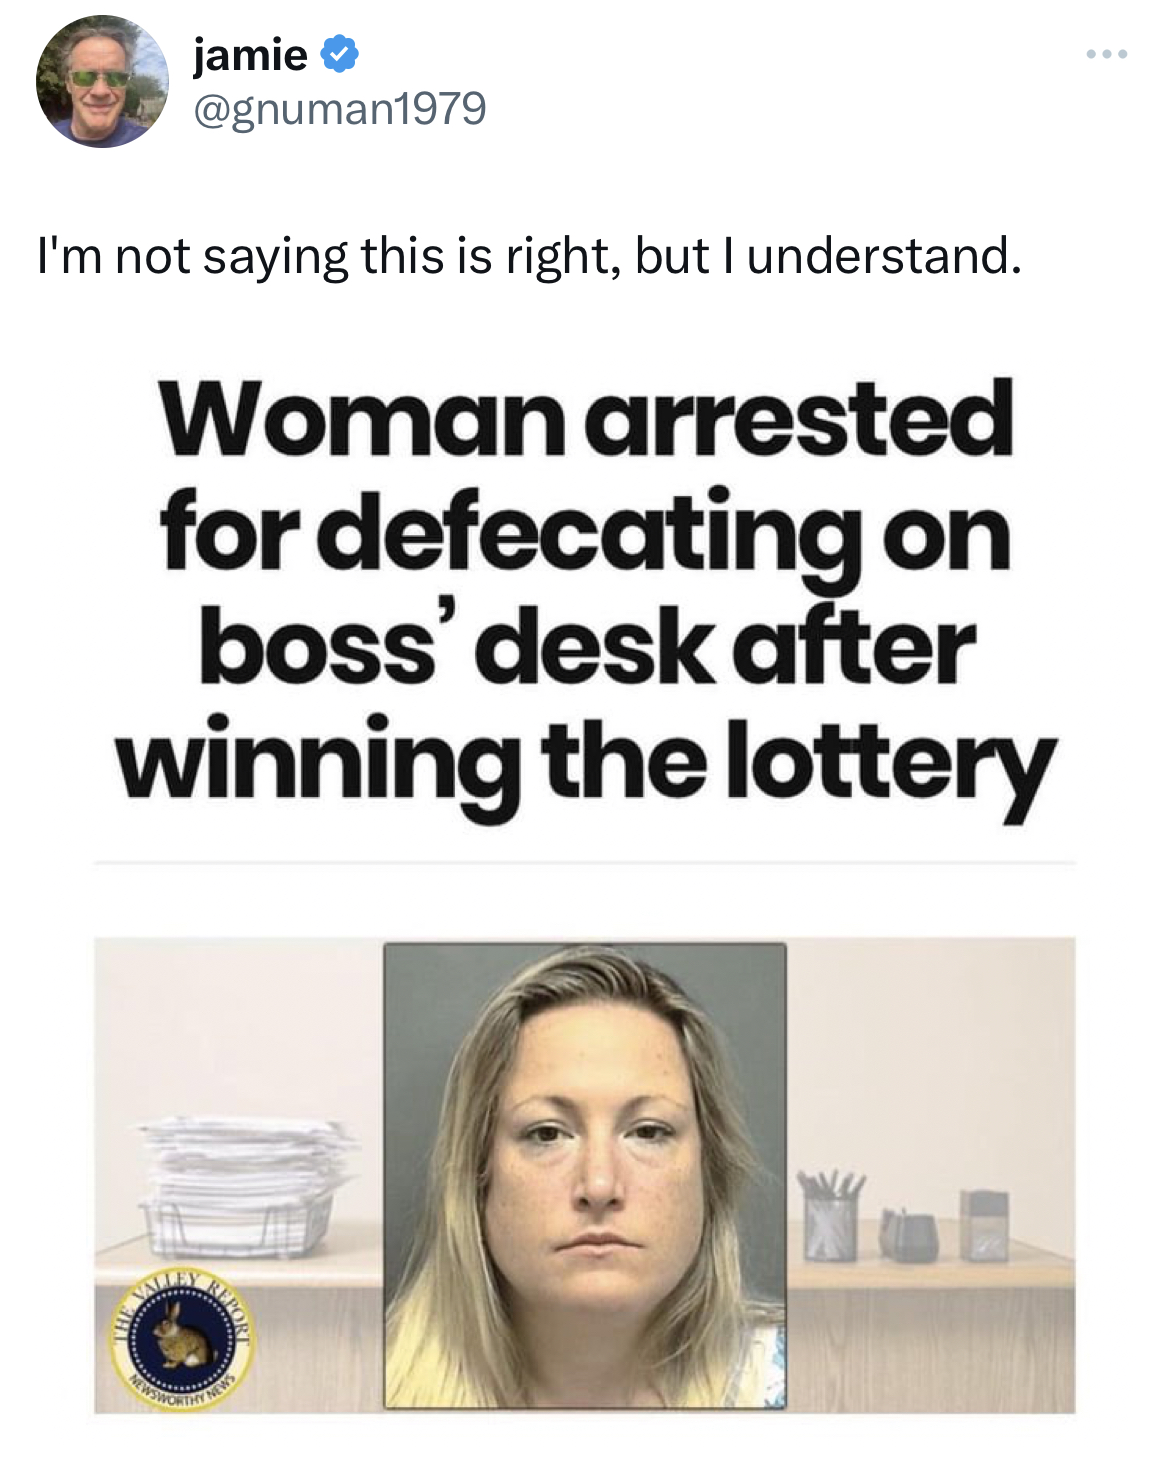 savage tweets - woman arrested after pooping on boss's desk after winning lottery - jamie I'm not saying this is right, but I understand. Woman arrested for defecating on boss' desk after winning the lottery Ar www